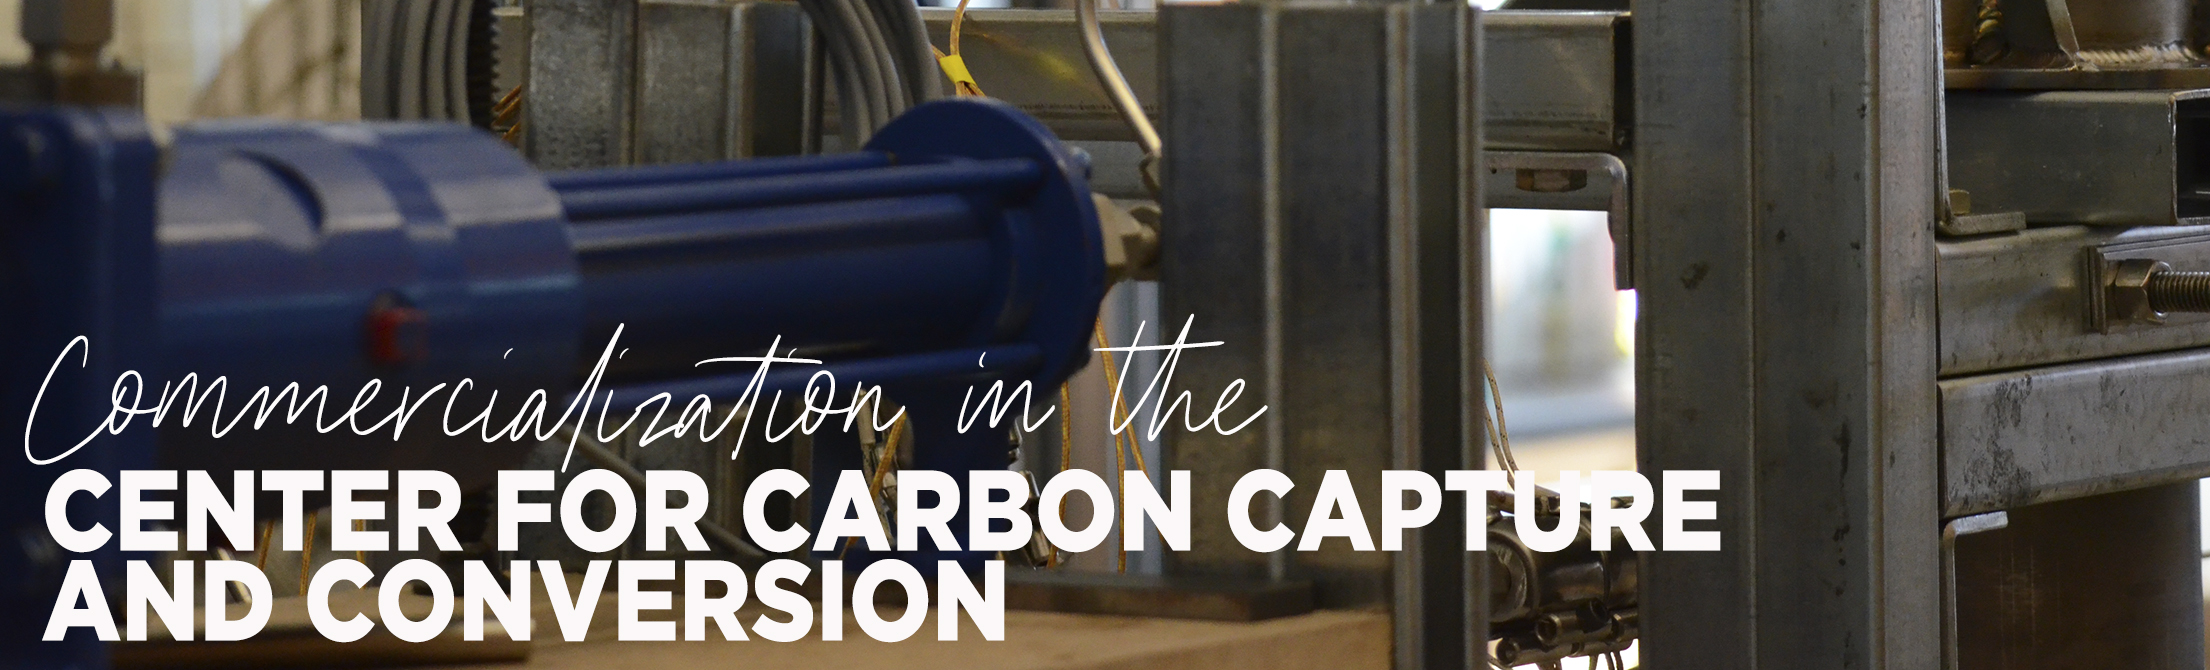 Commercialization in the Center for Carbon Capture and Conversion